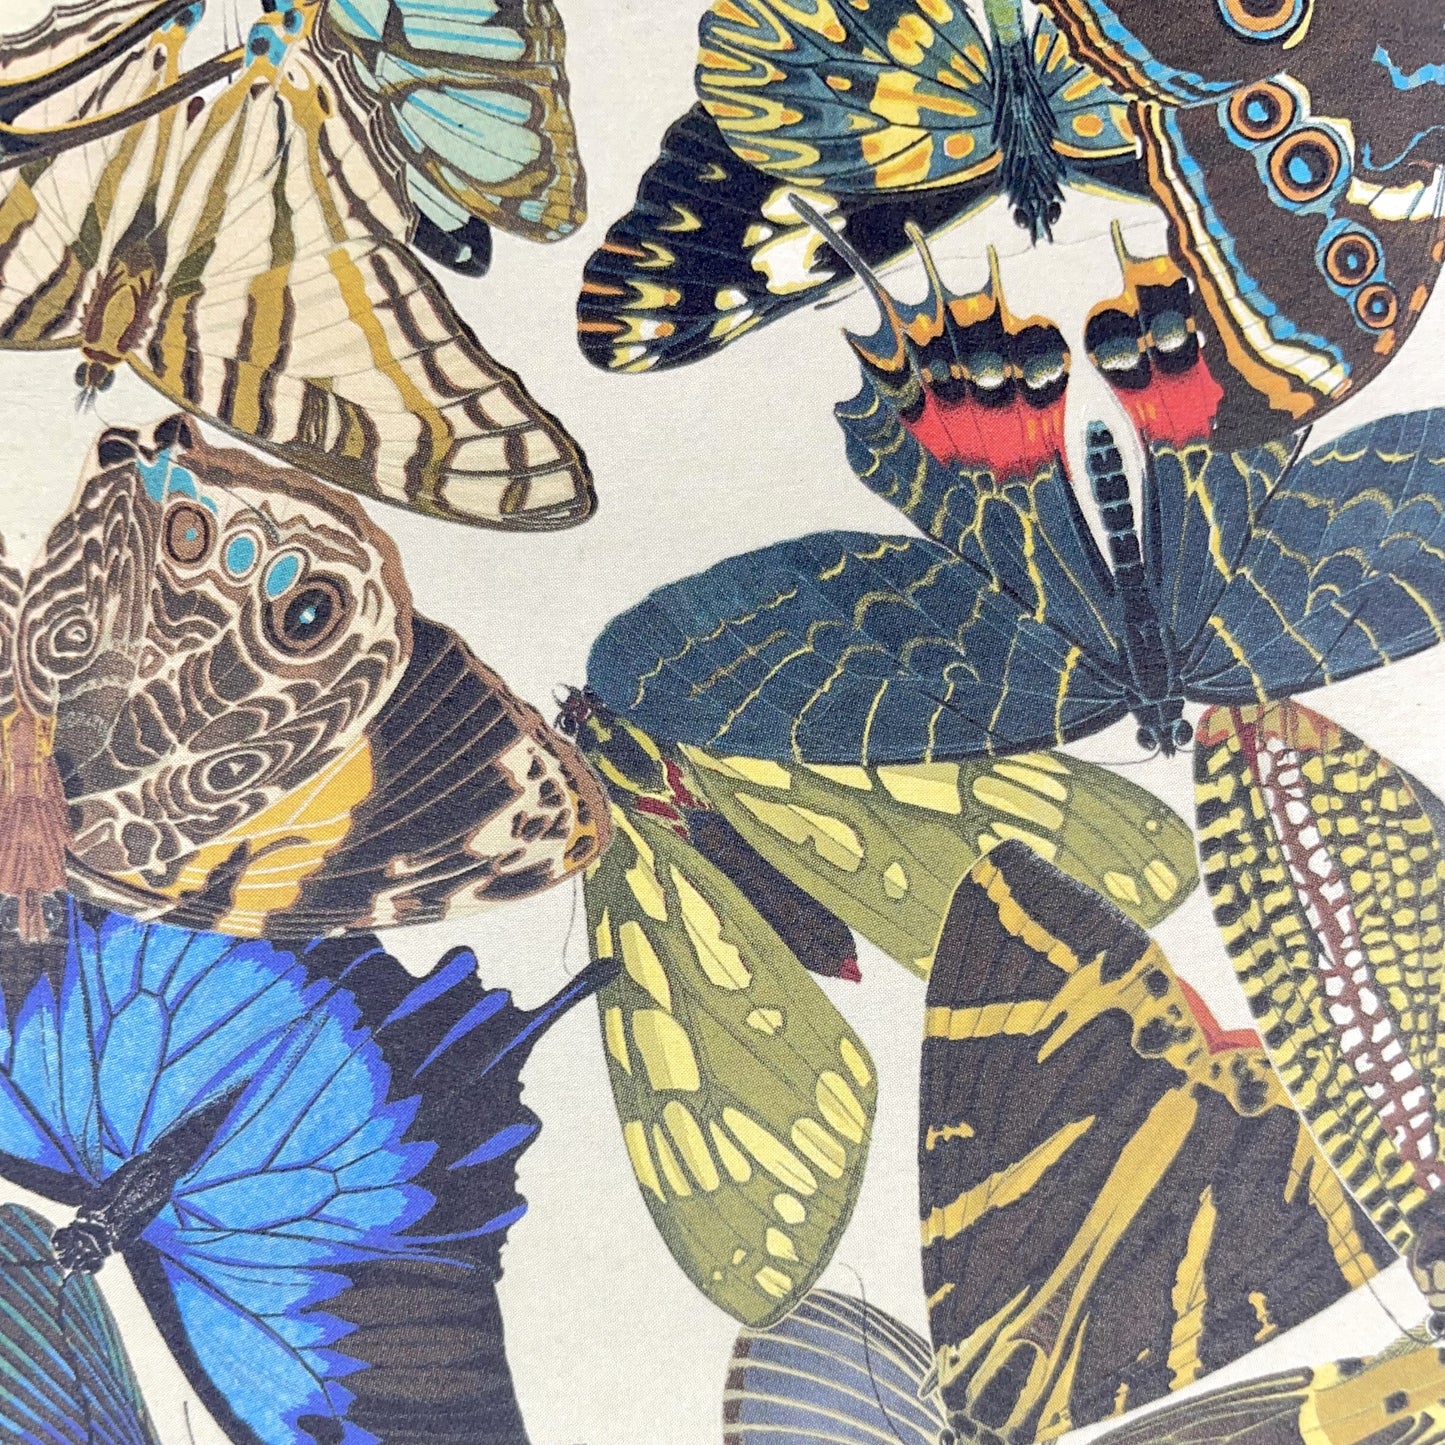 Poster wrap by The Pattern Book. This wrapping paper has an all-over butterfly design. Detailed illustrations of a wide variety of colourful butterflies, close up 